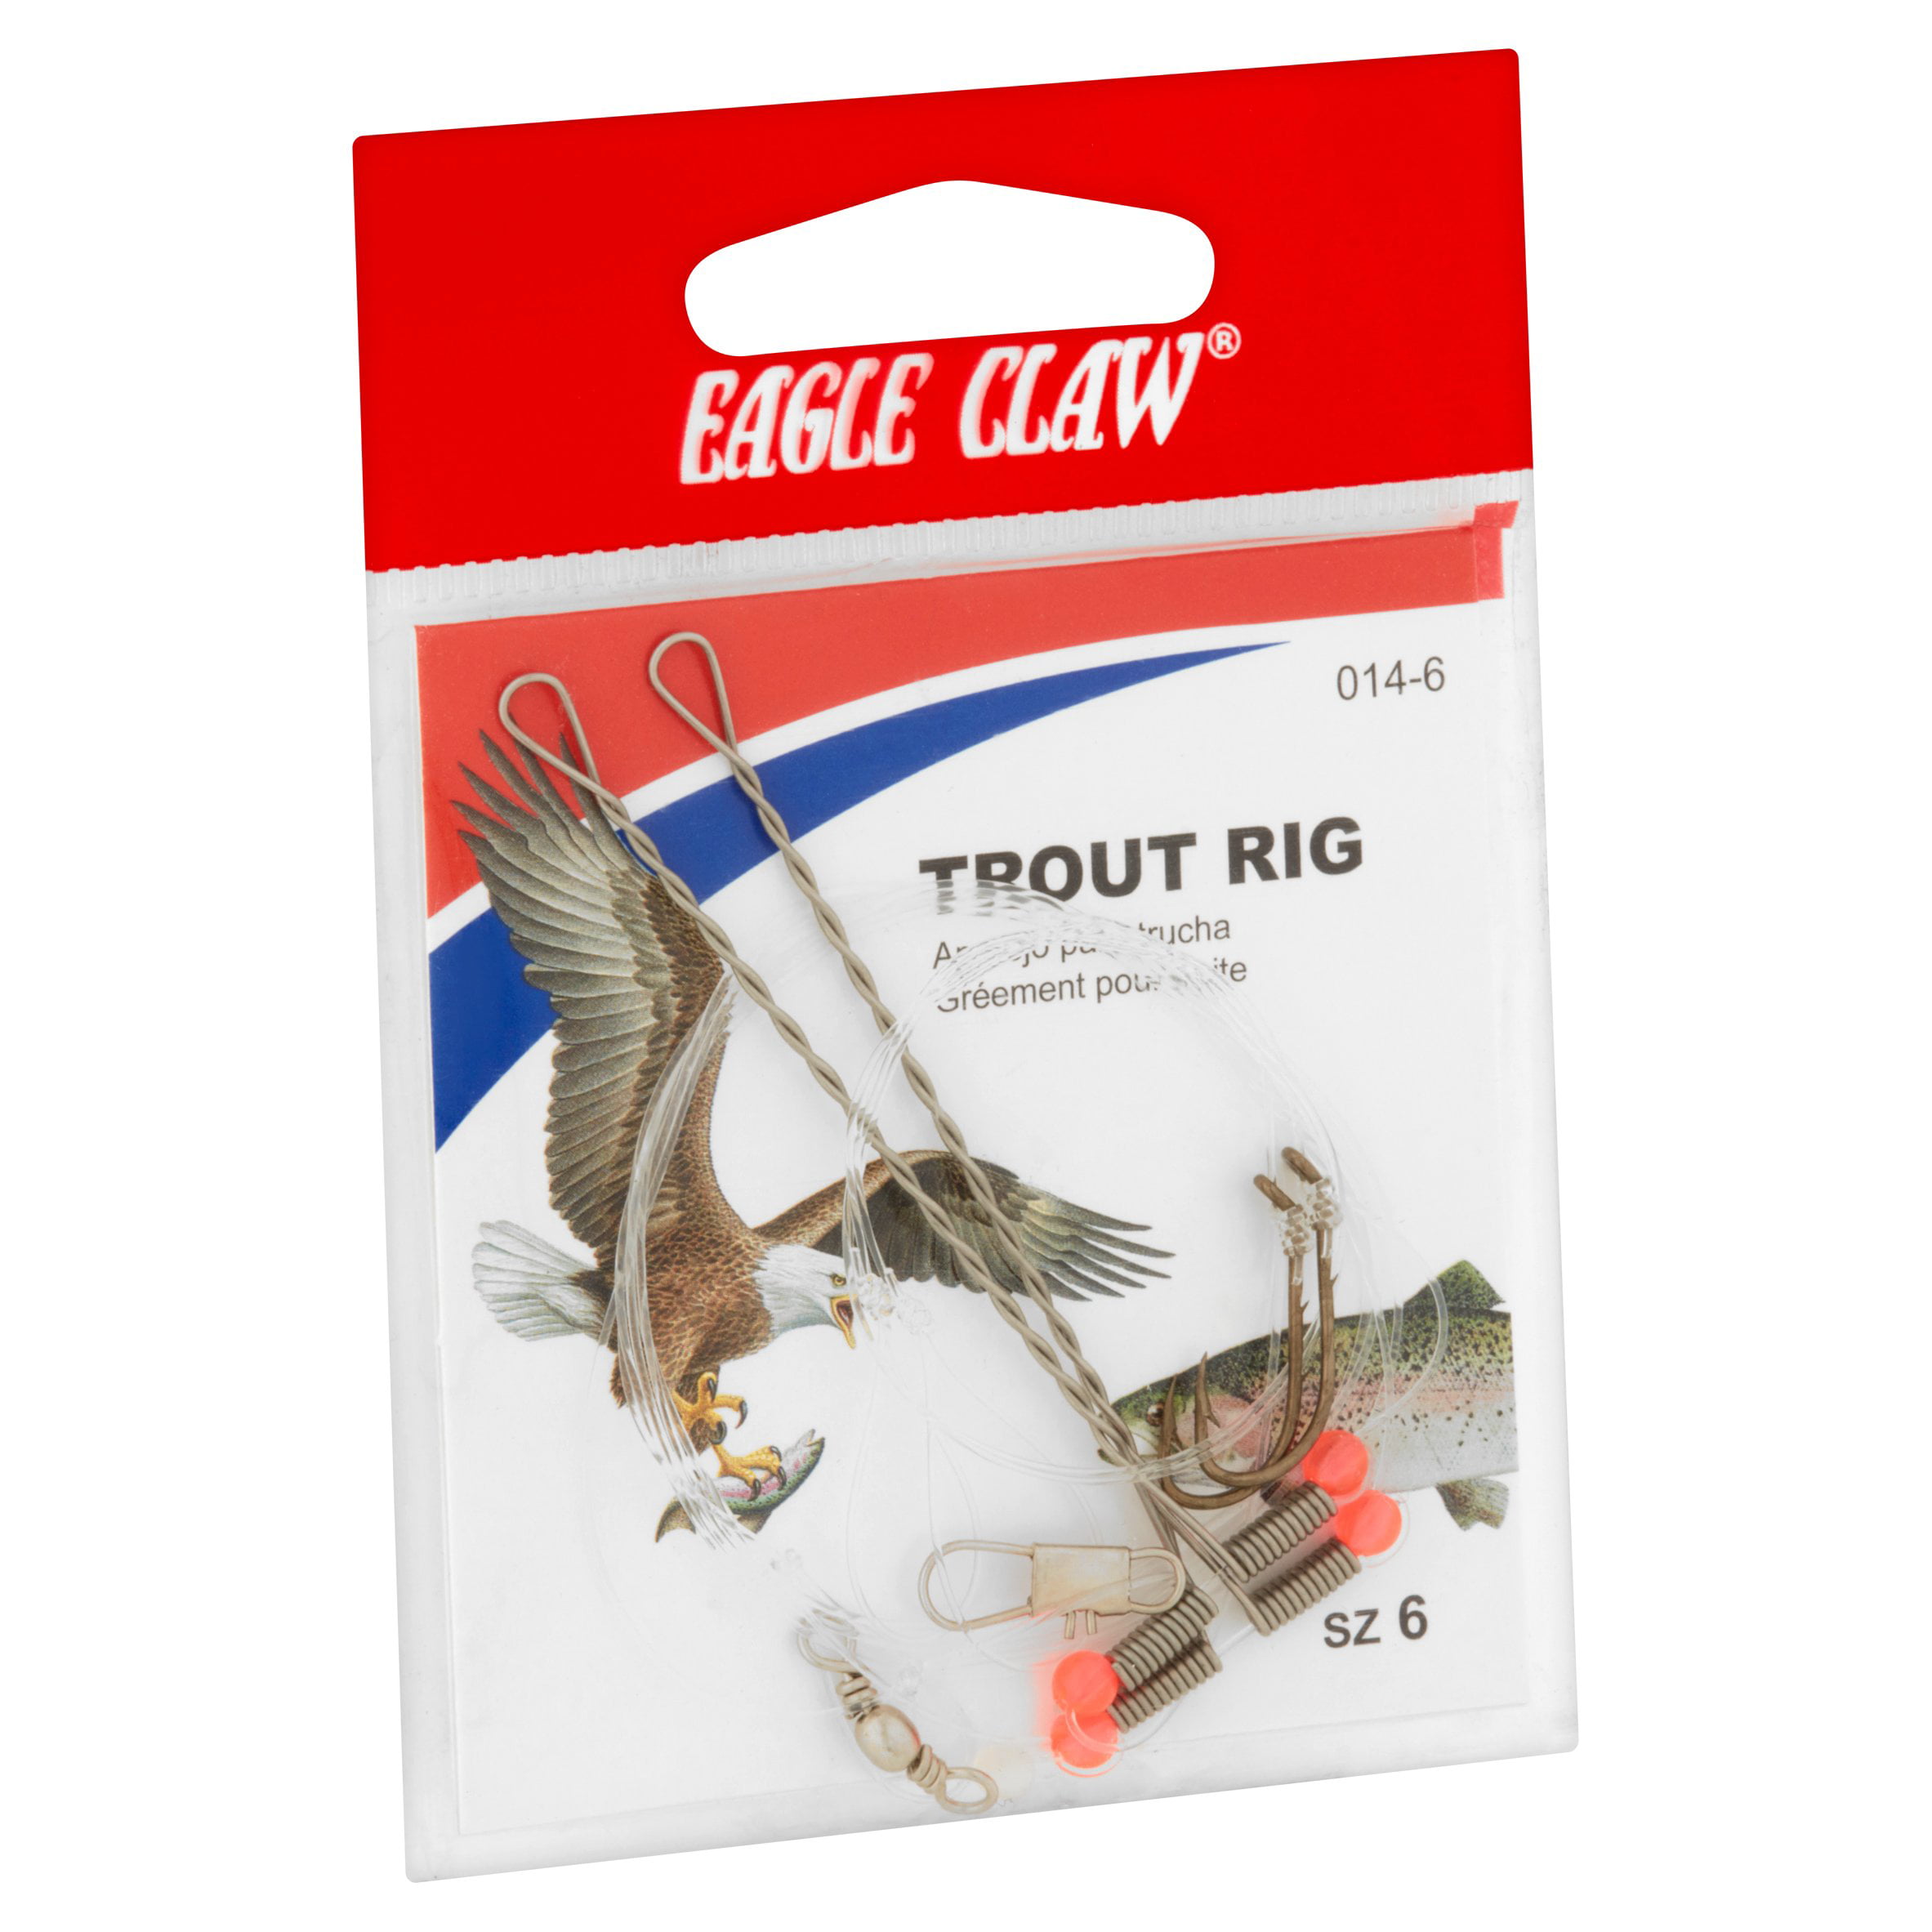 Eagle claw, Another Spin on Glass